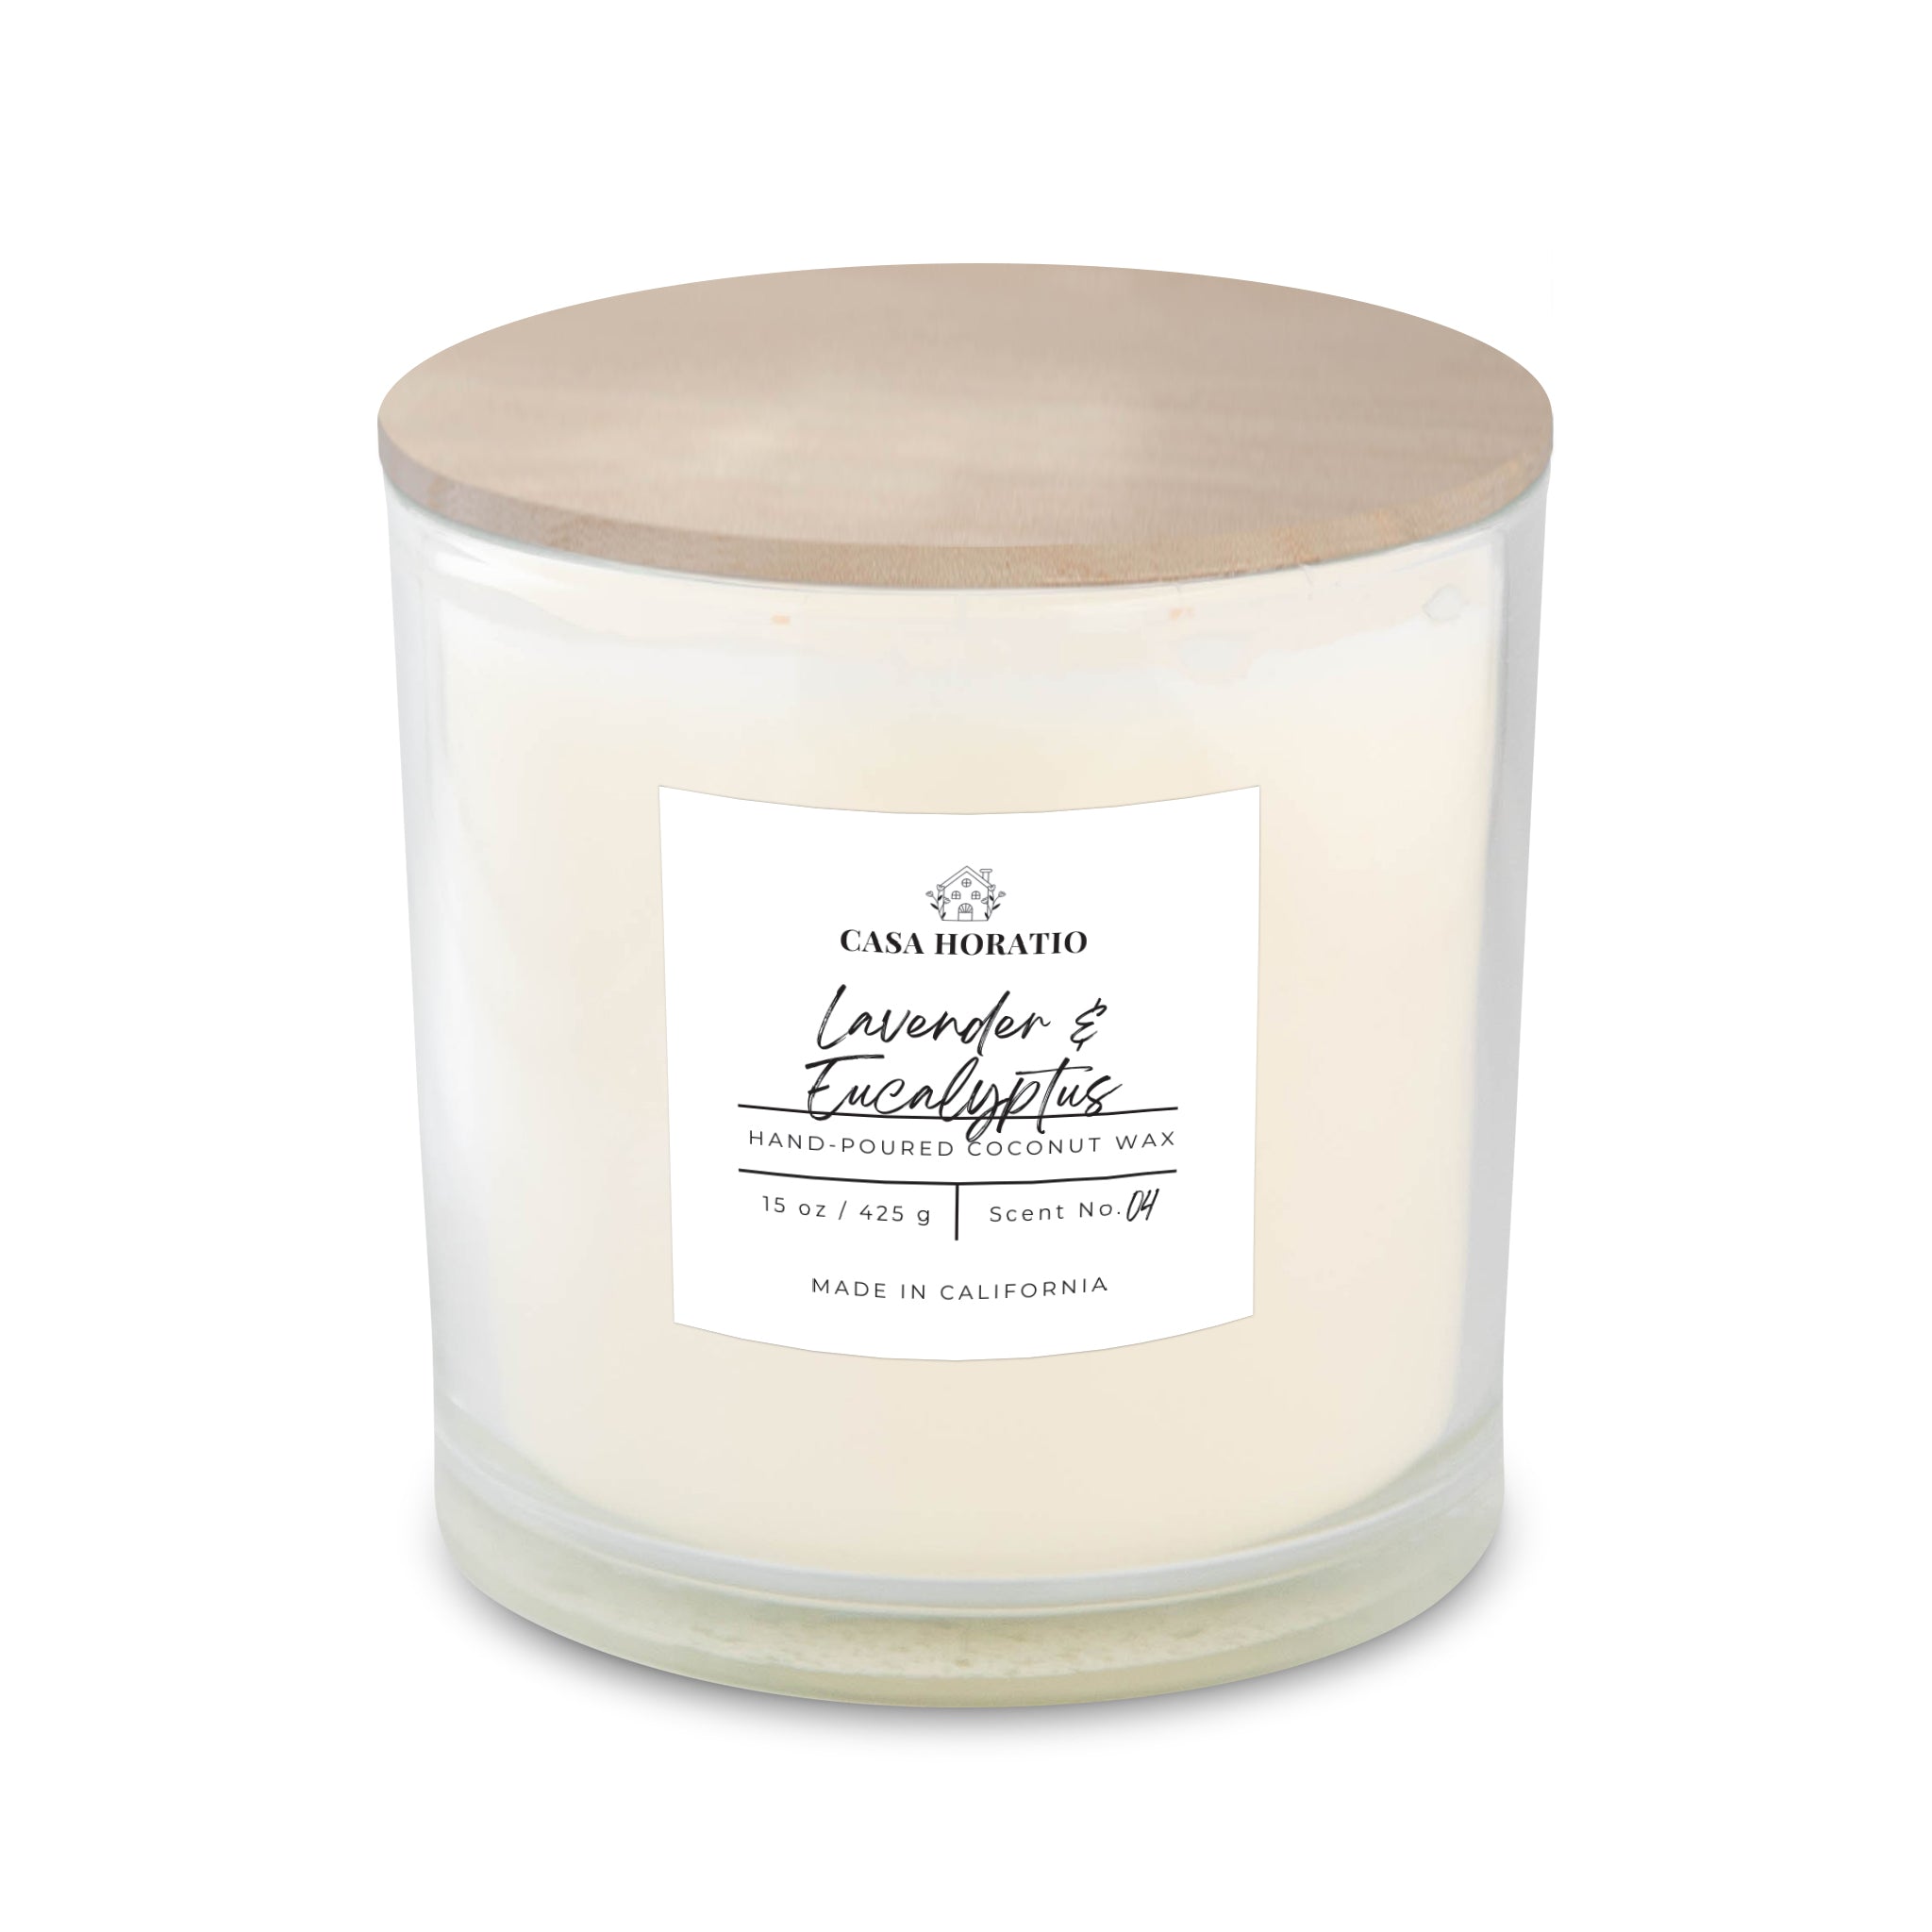 Hand-Poured Coconut Wax Candle, Essential Oils Collection